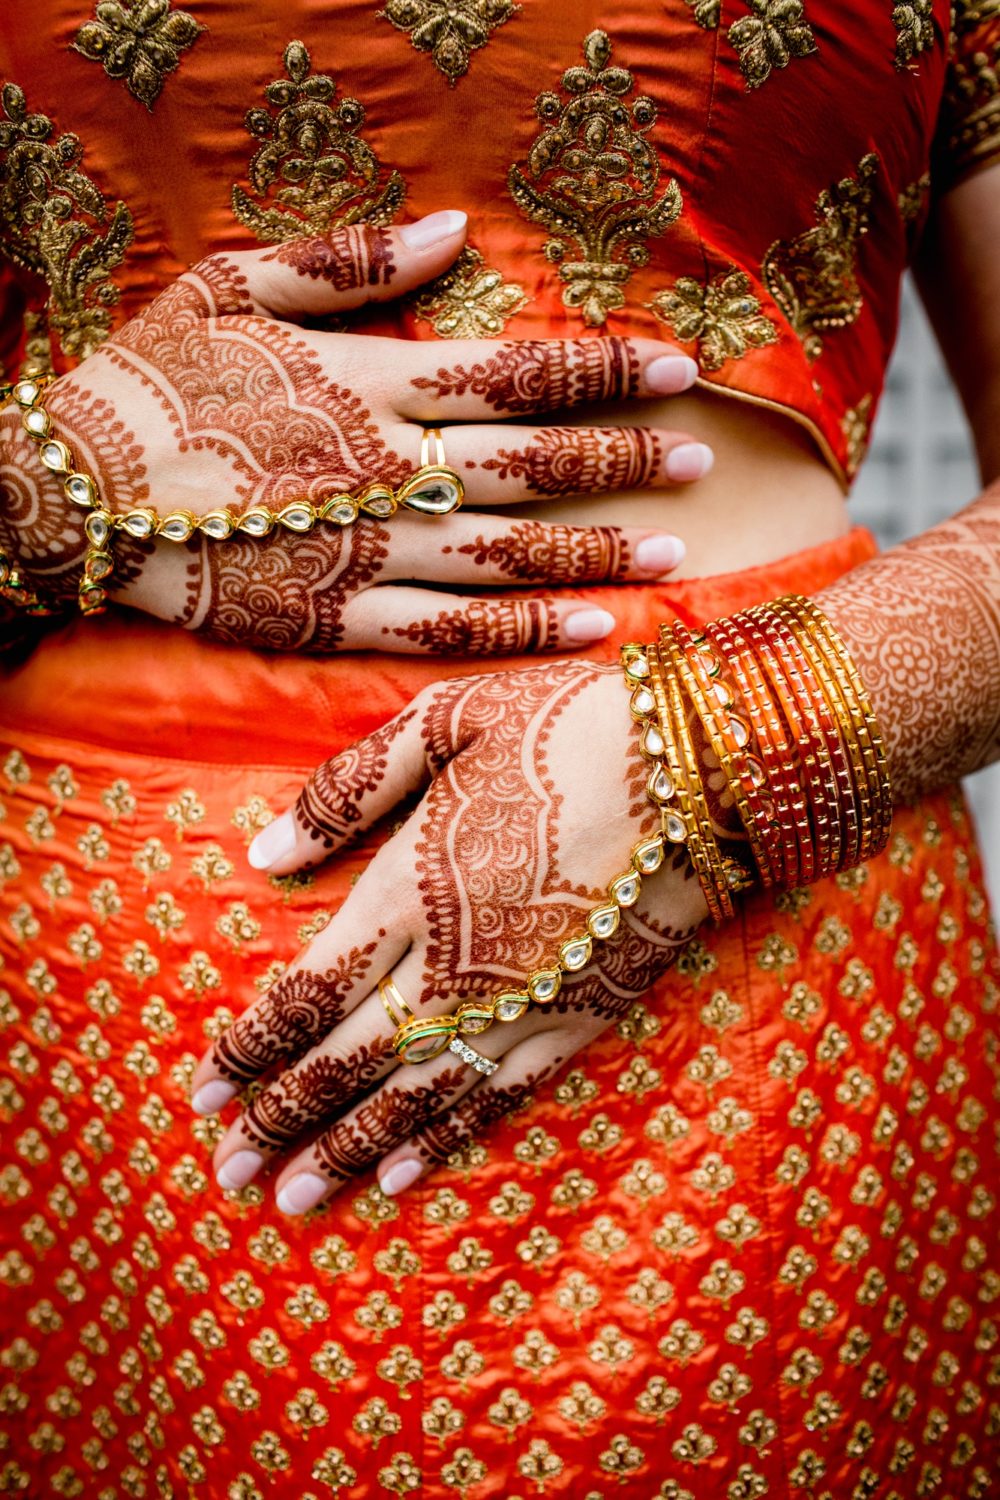 A brides hand covered in henna before an Aurora Balaji Temple wedding